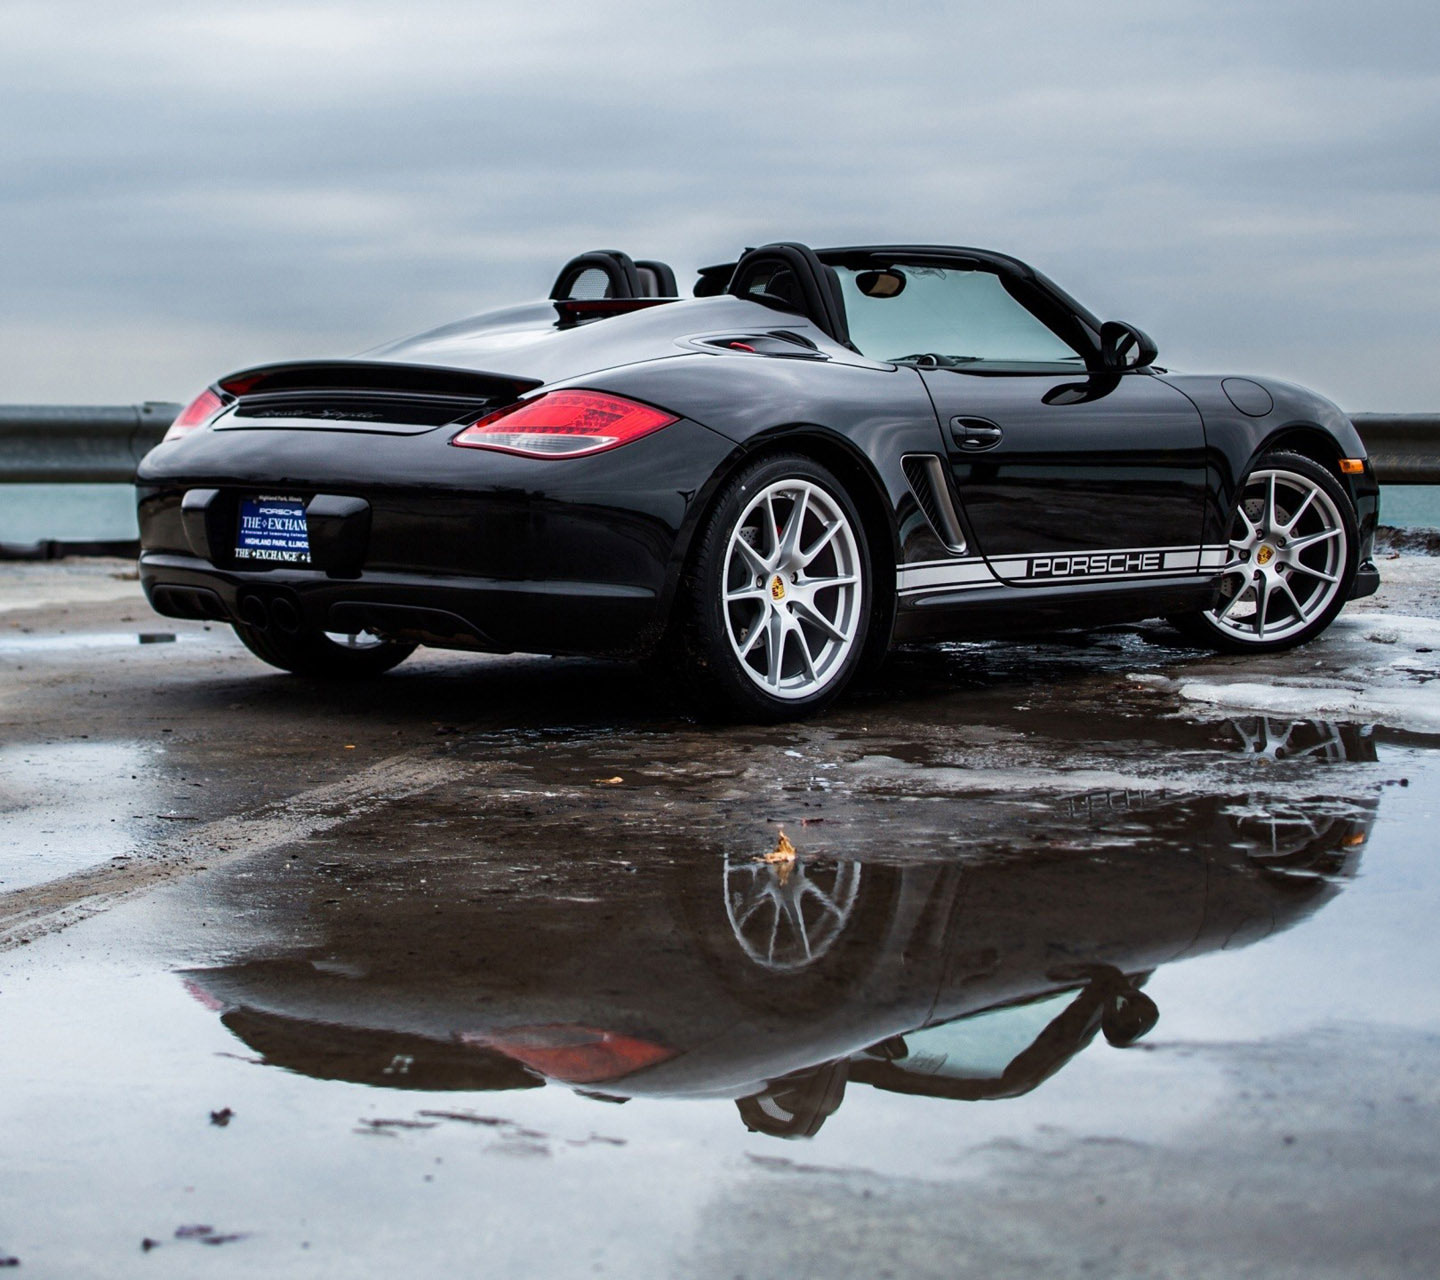 Galaxy S3 Wallpaper - Boxster Spyder - HD Wallpapers - 9to5Wallpapers